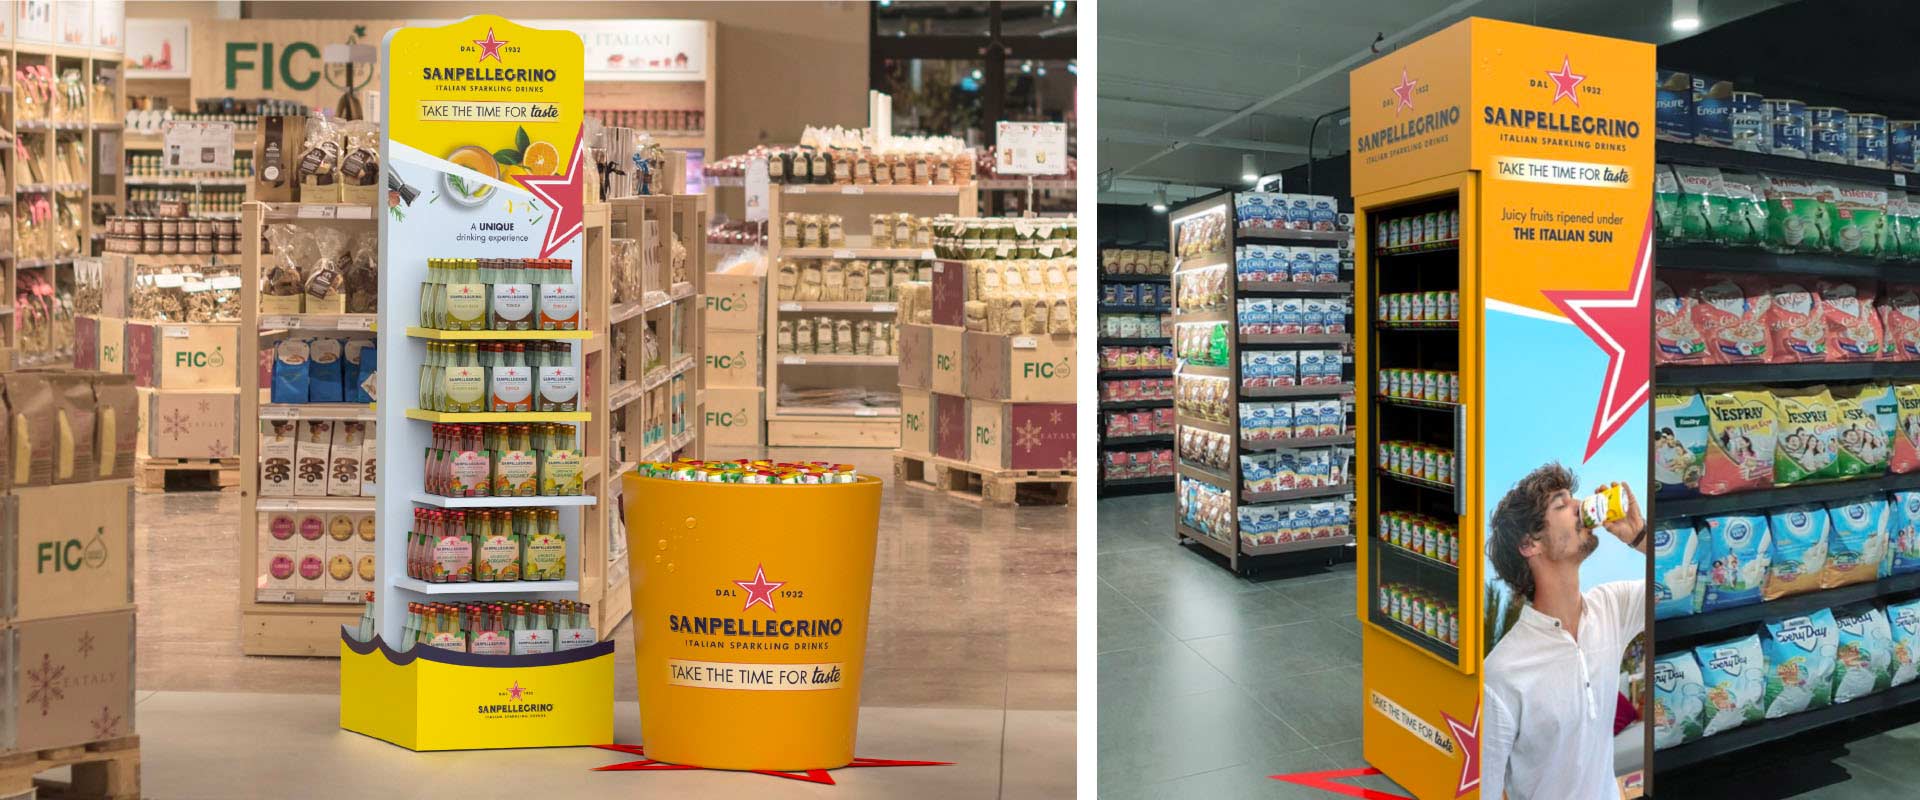 Free standing display unit, container and fridge for Sanpellegrino